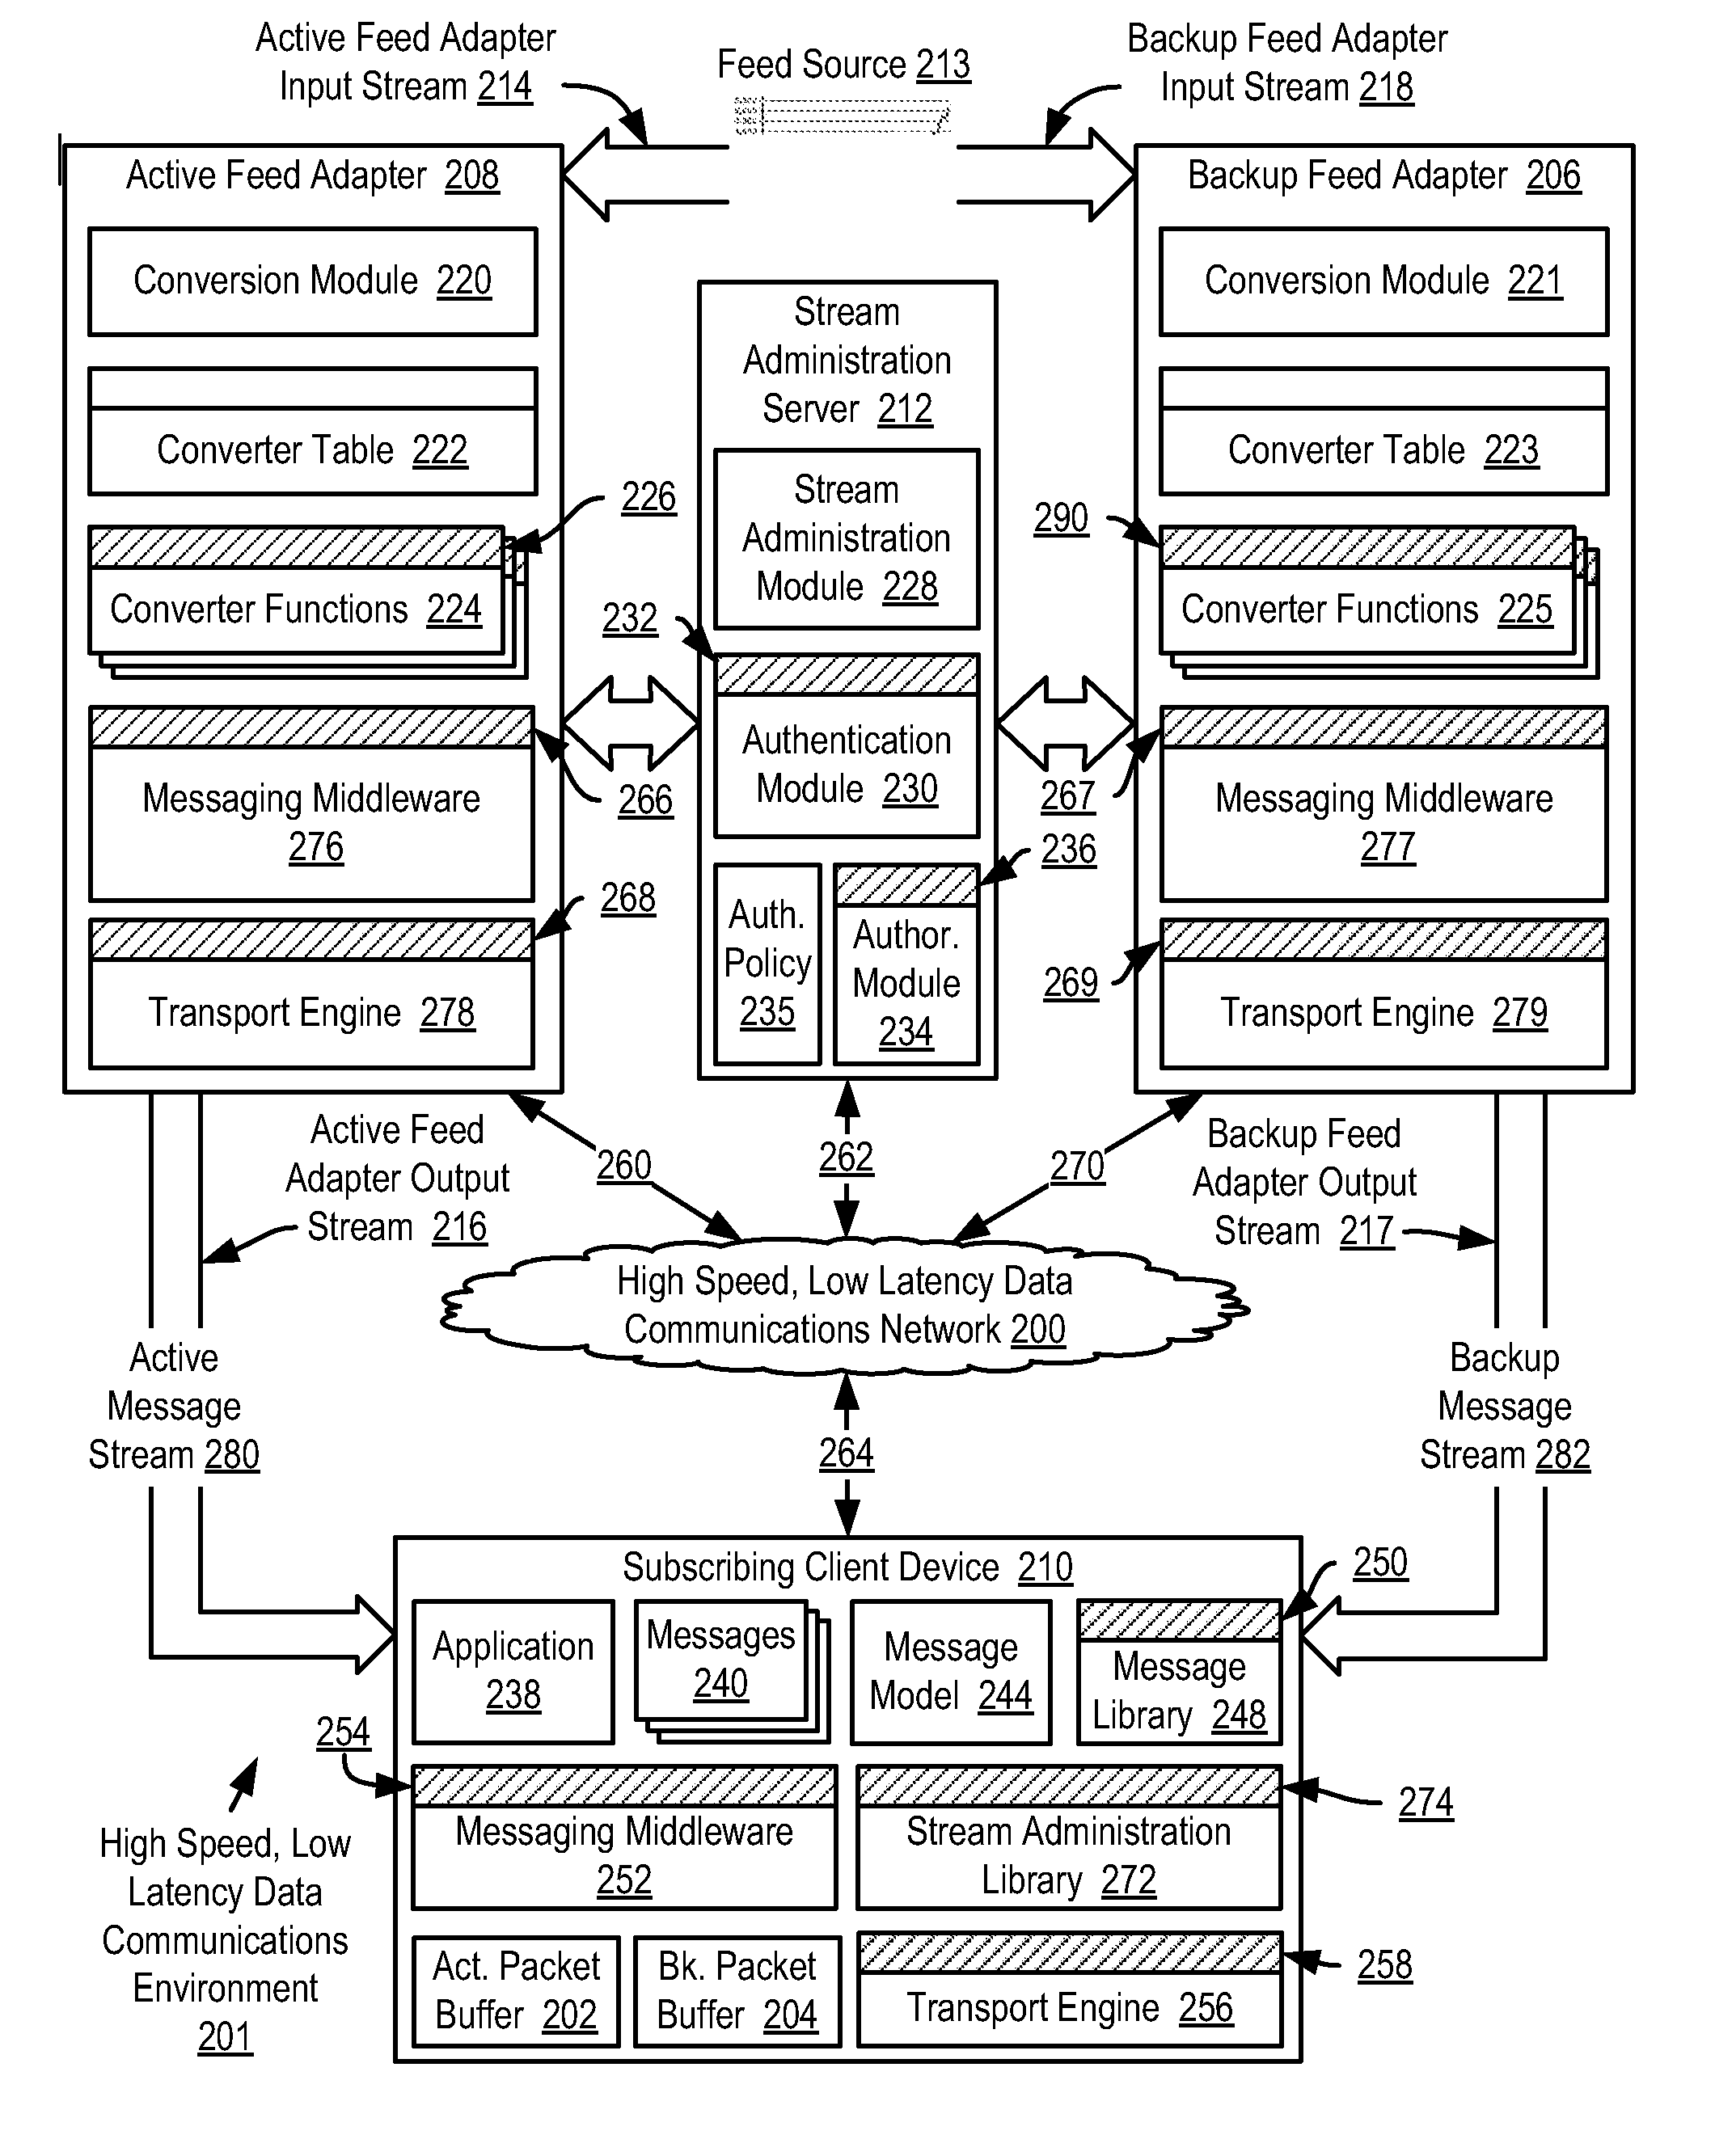 Selecting application messages from an active feed adapter and a backup feed adapter for application-level data processing in a high speed, low latency data communications environment